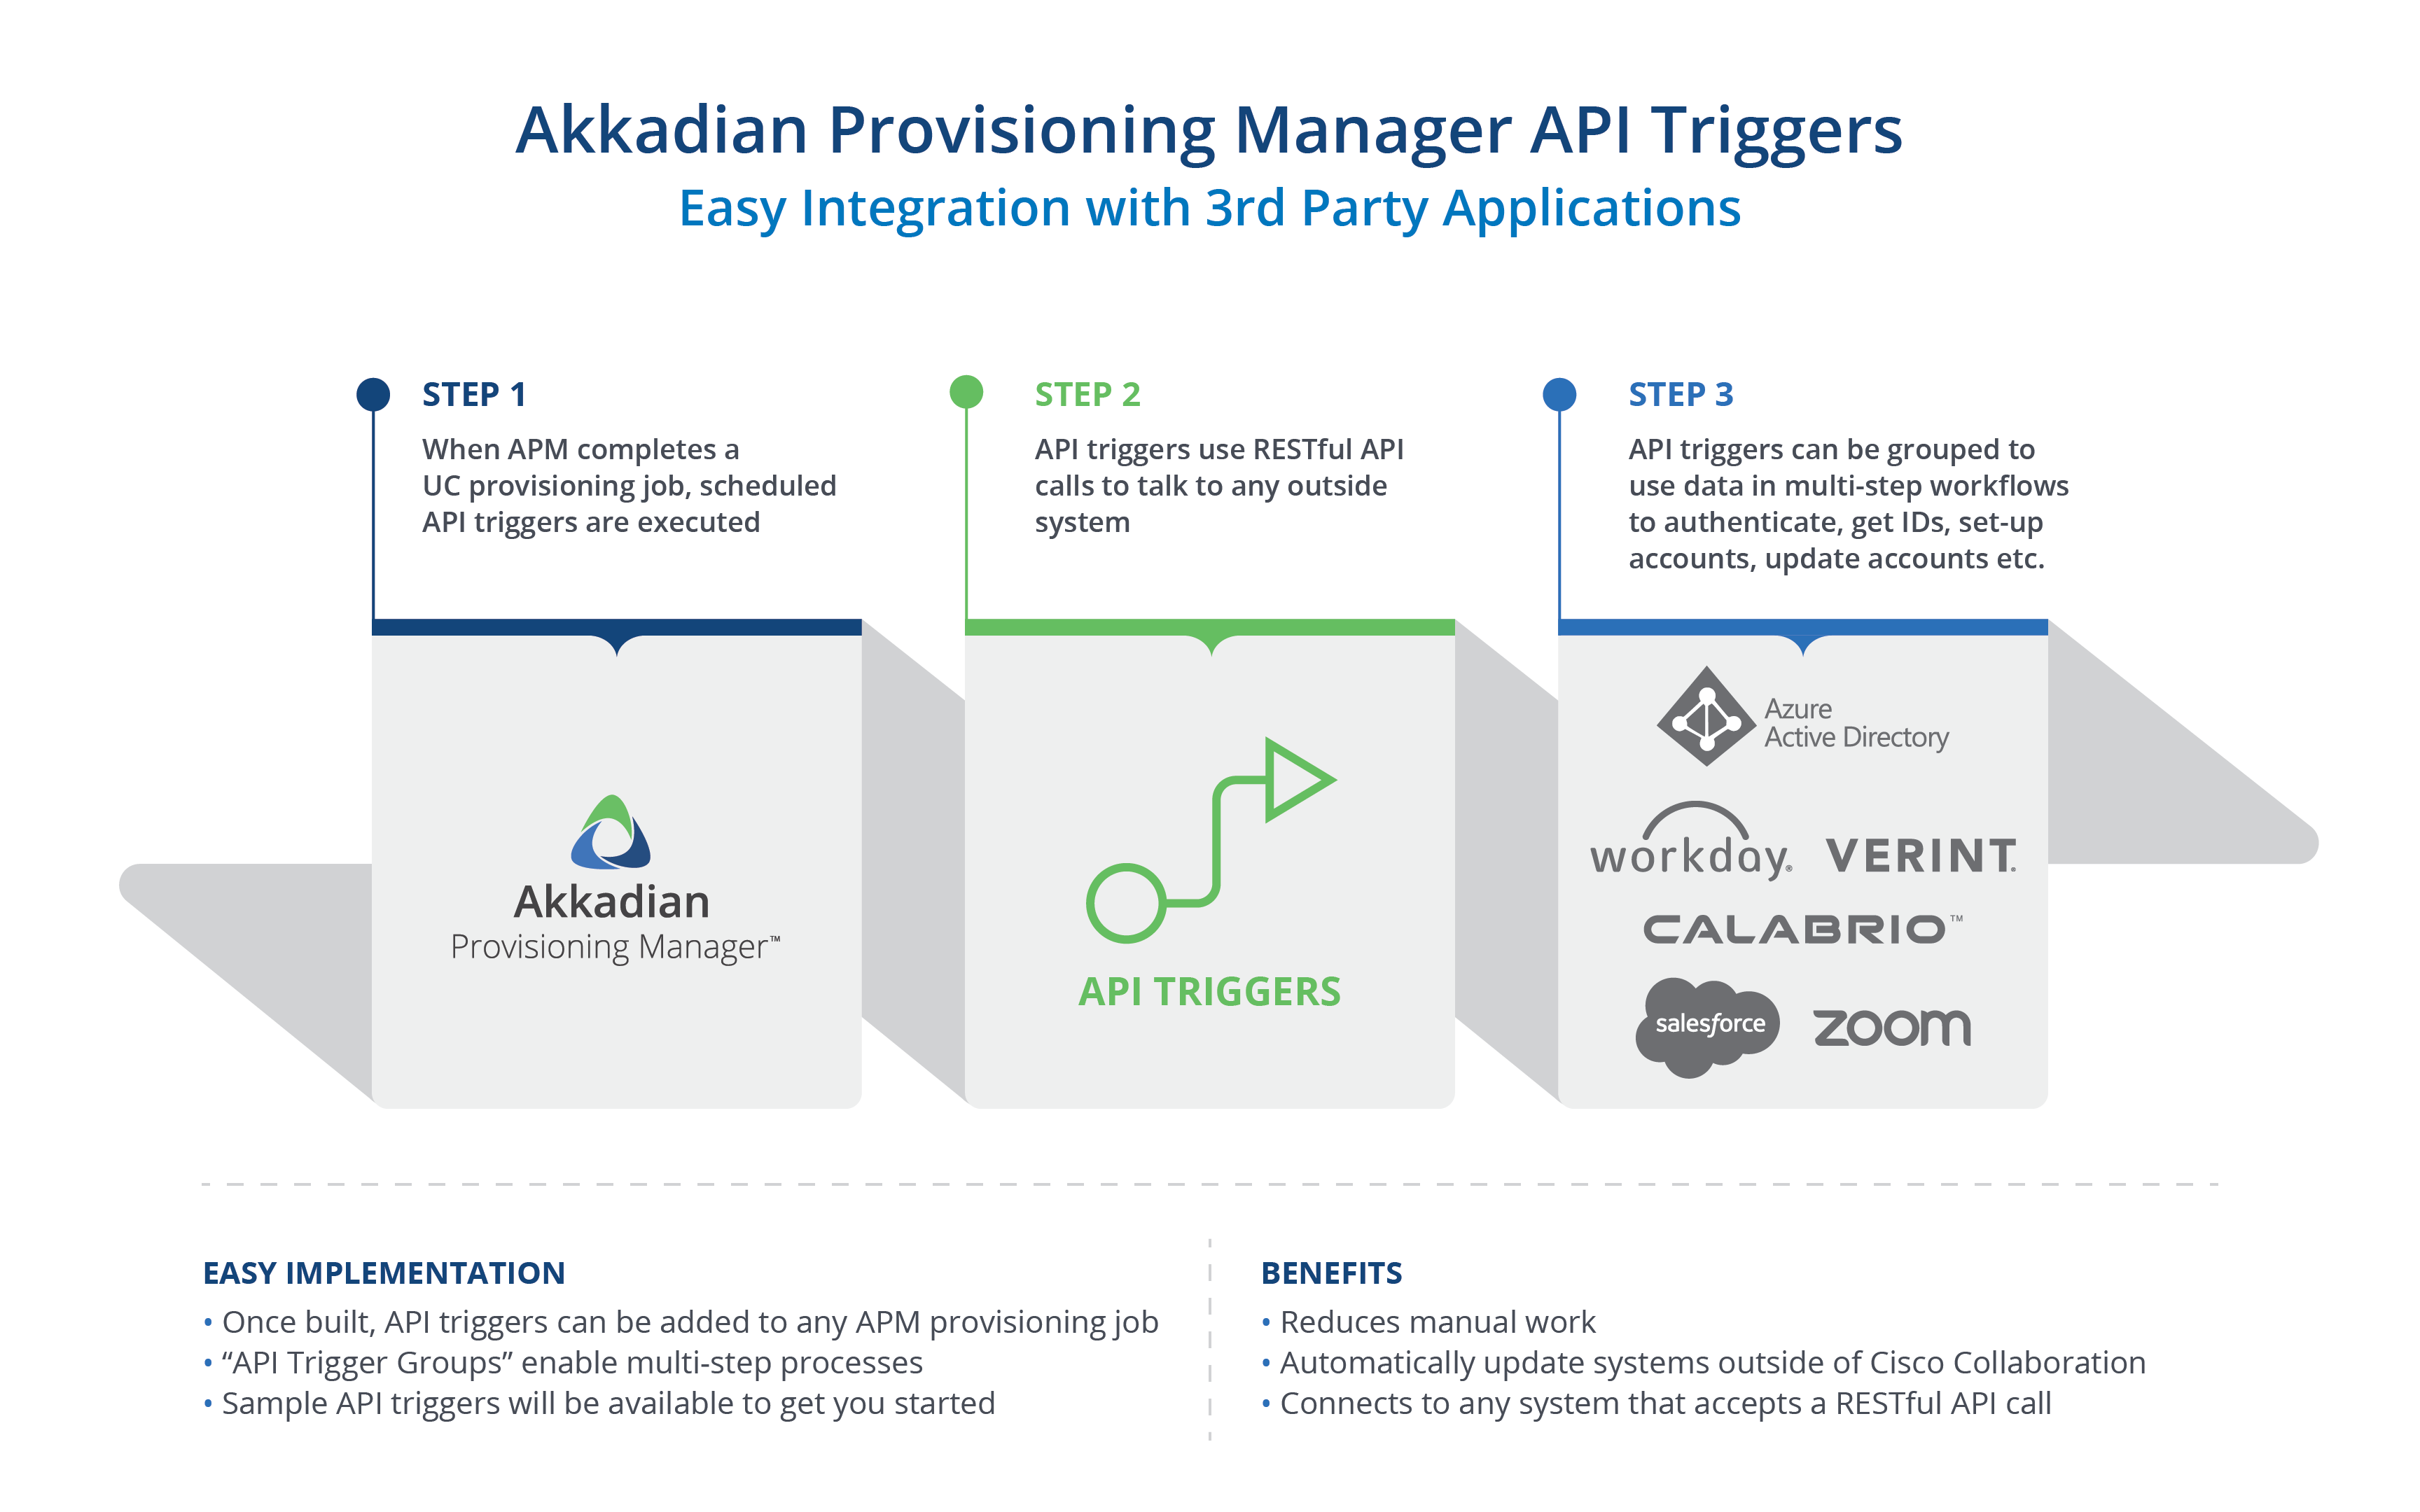 API triggers make it easy to connect applications within your complex UC technology stack